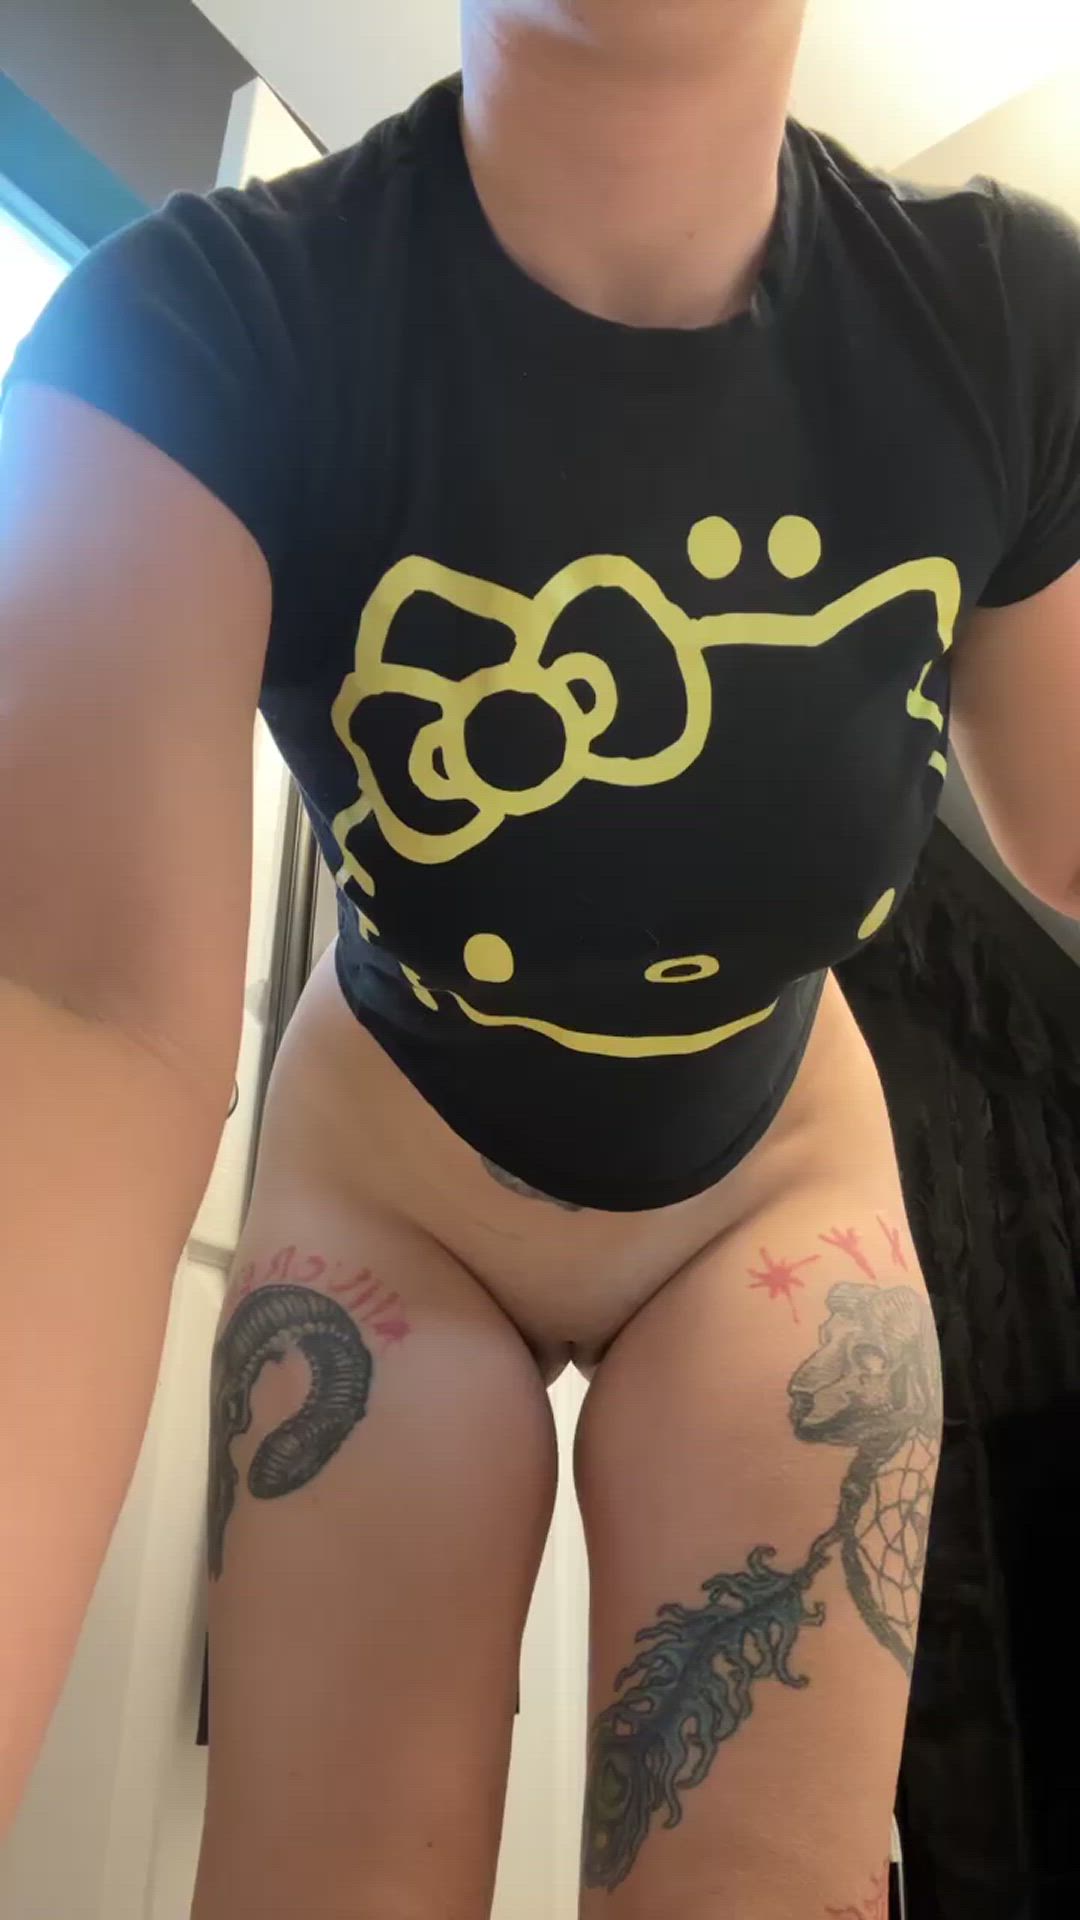 Grool porn video with onlyfans model morbidminx <strong>@morbidminx</strong>